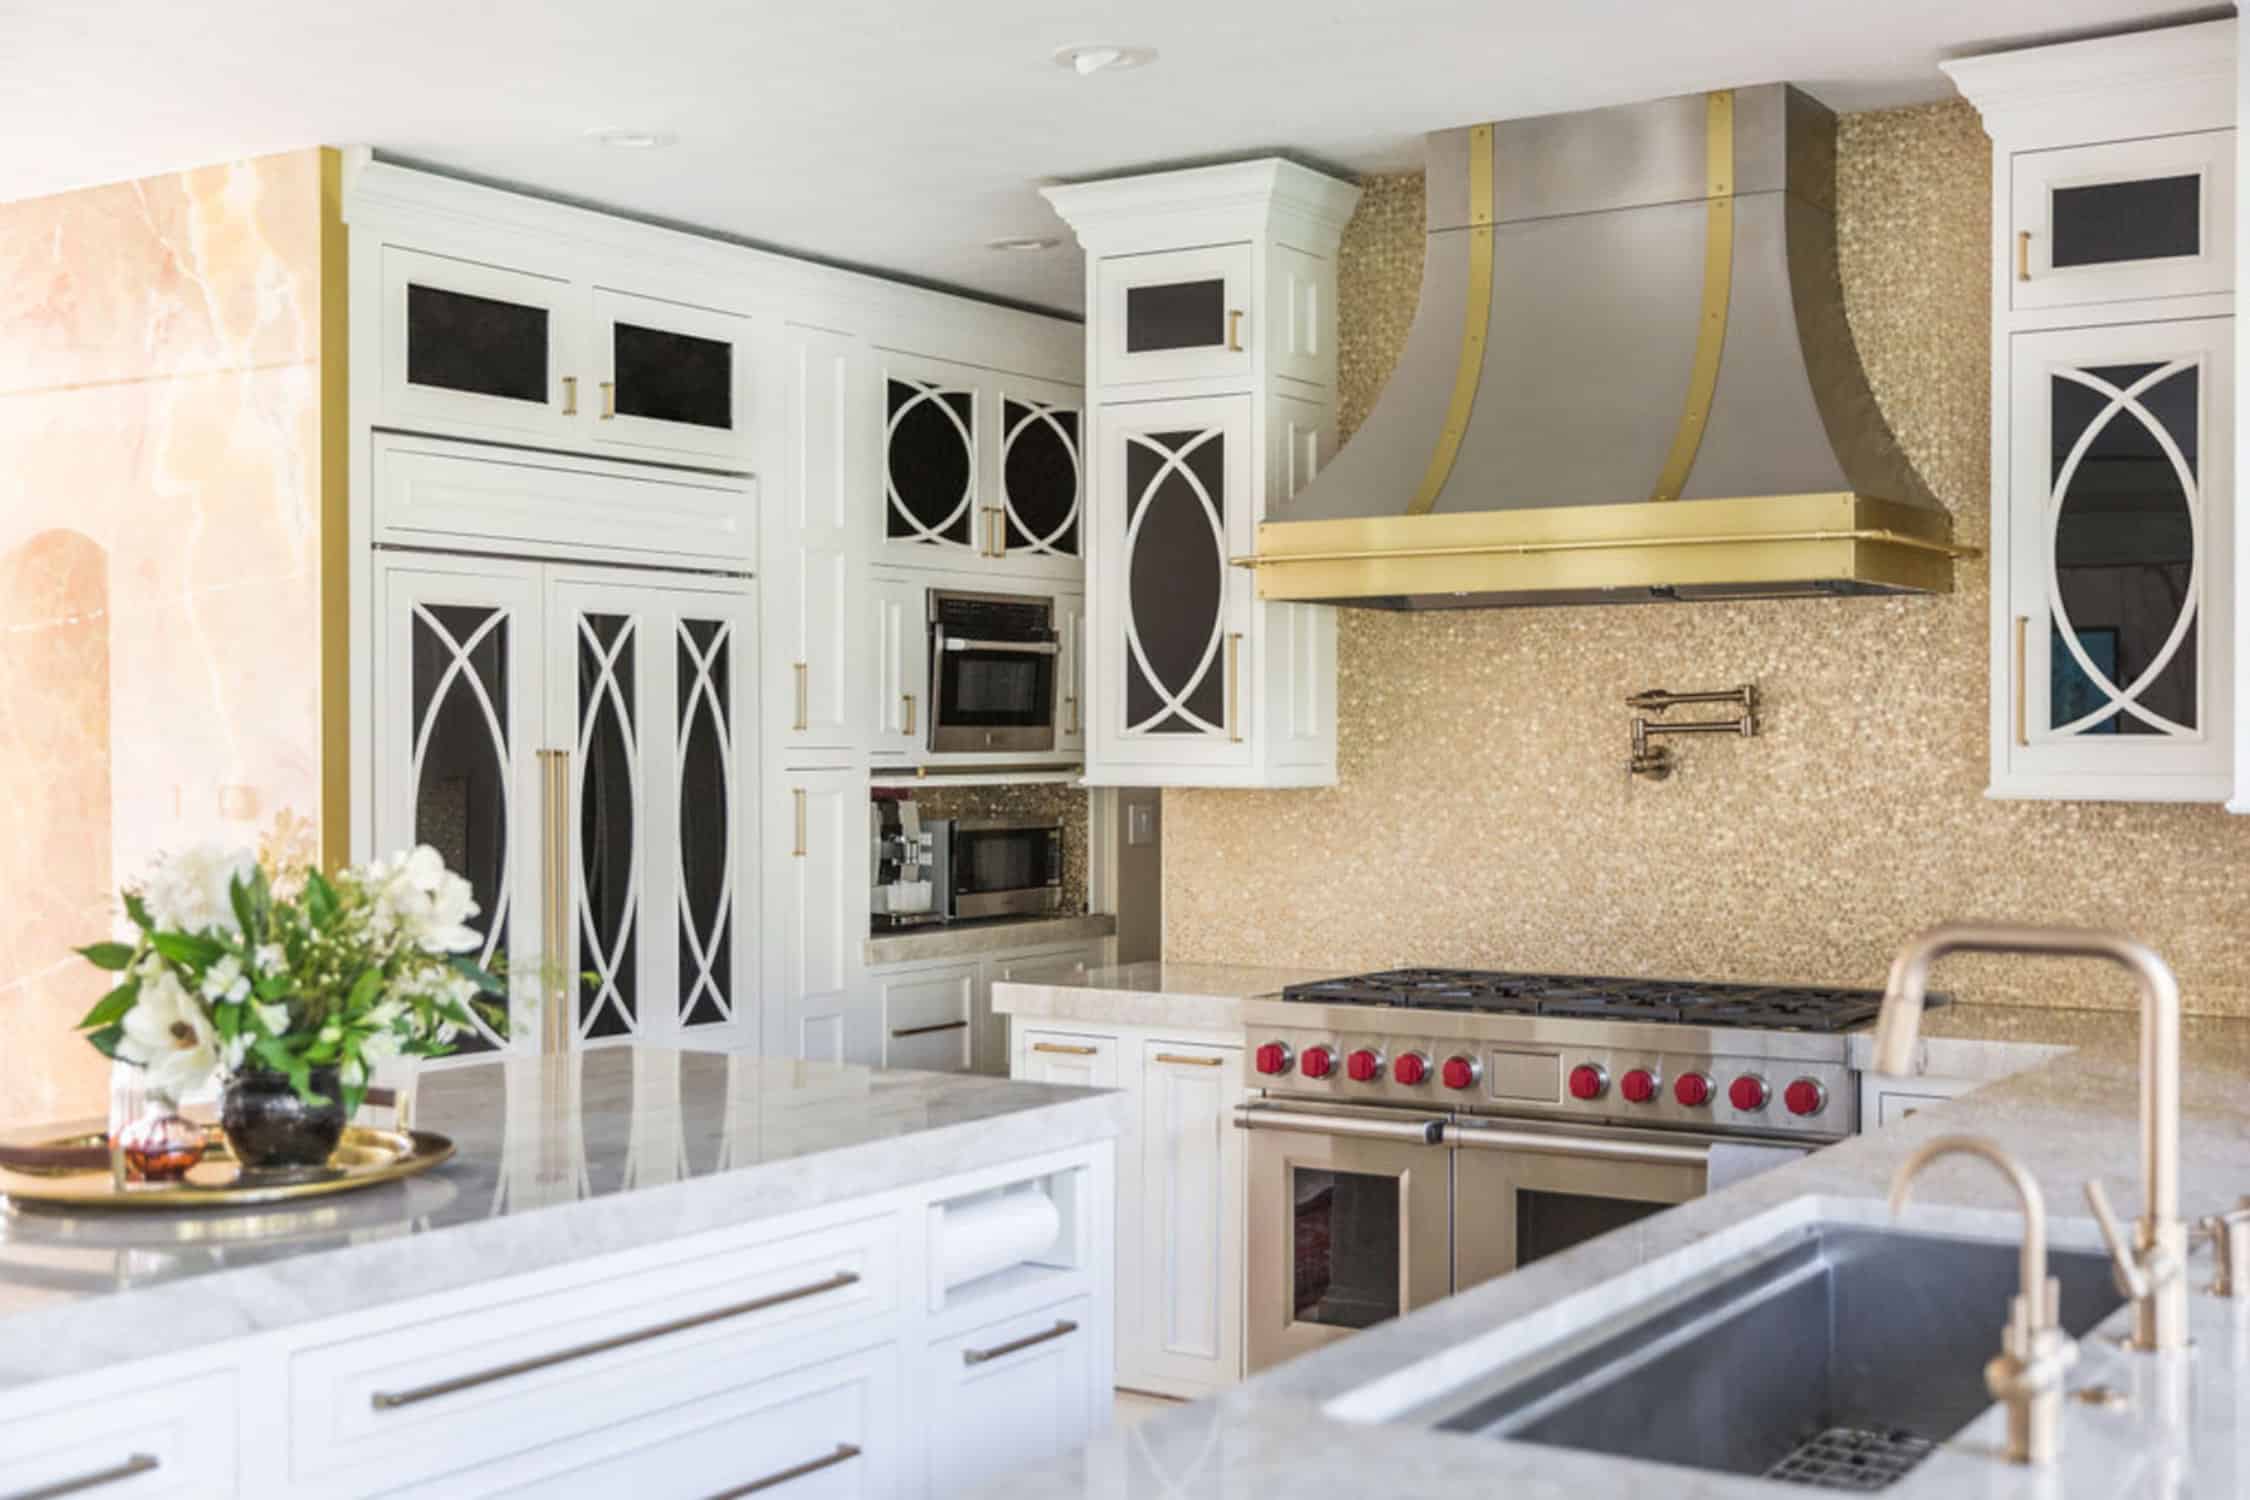 Nicholas Design Build | A remodeled kitchen with a white and gold hood.